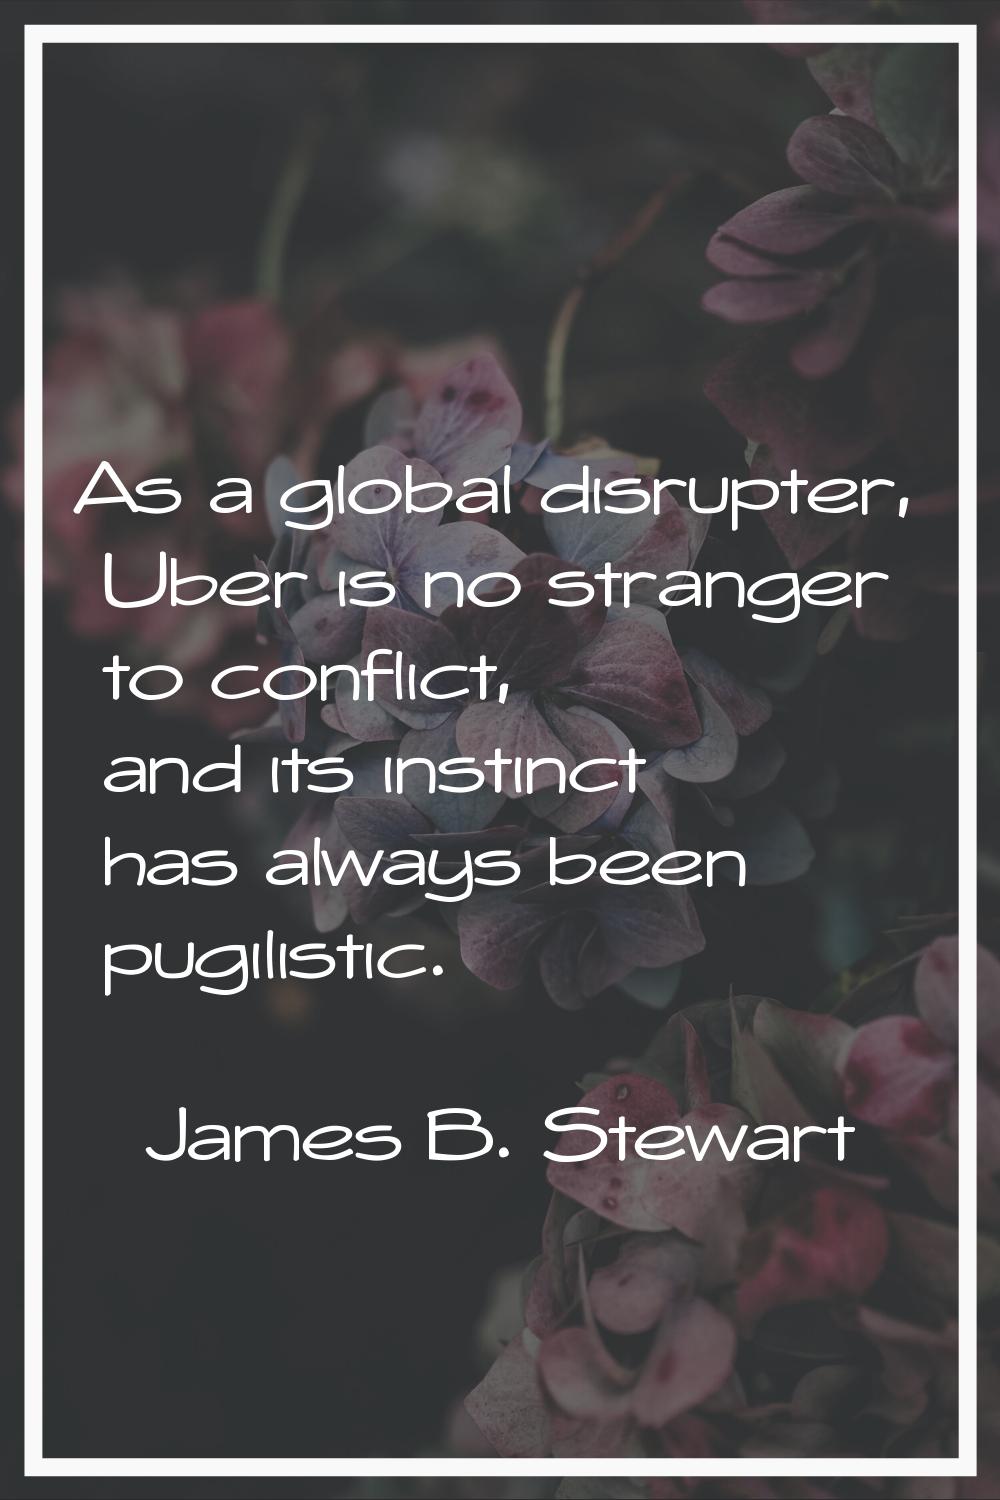 As a global disrupter, Uber is no stranger to conflict, and its instinct has always been pugilistic